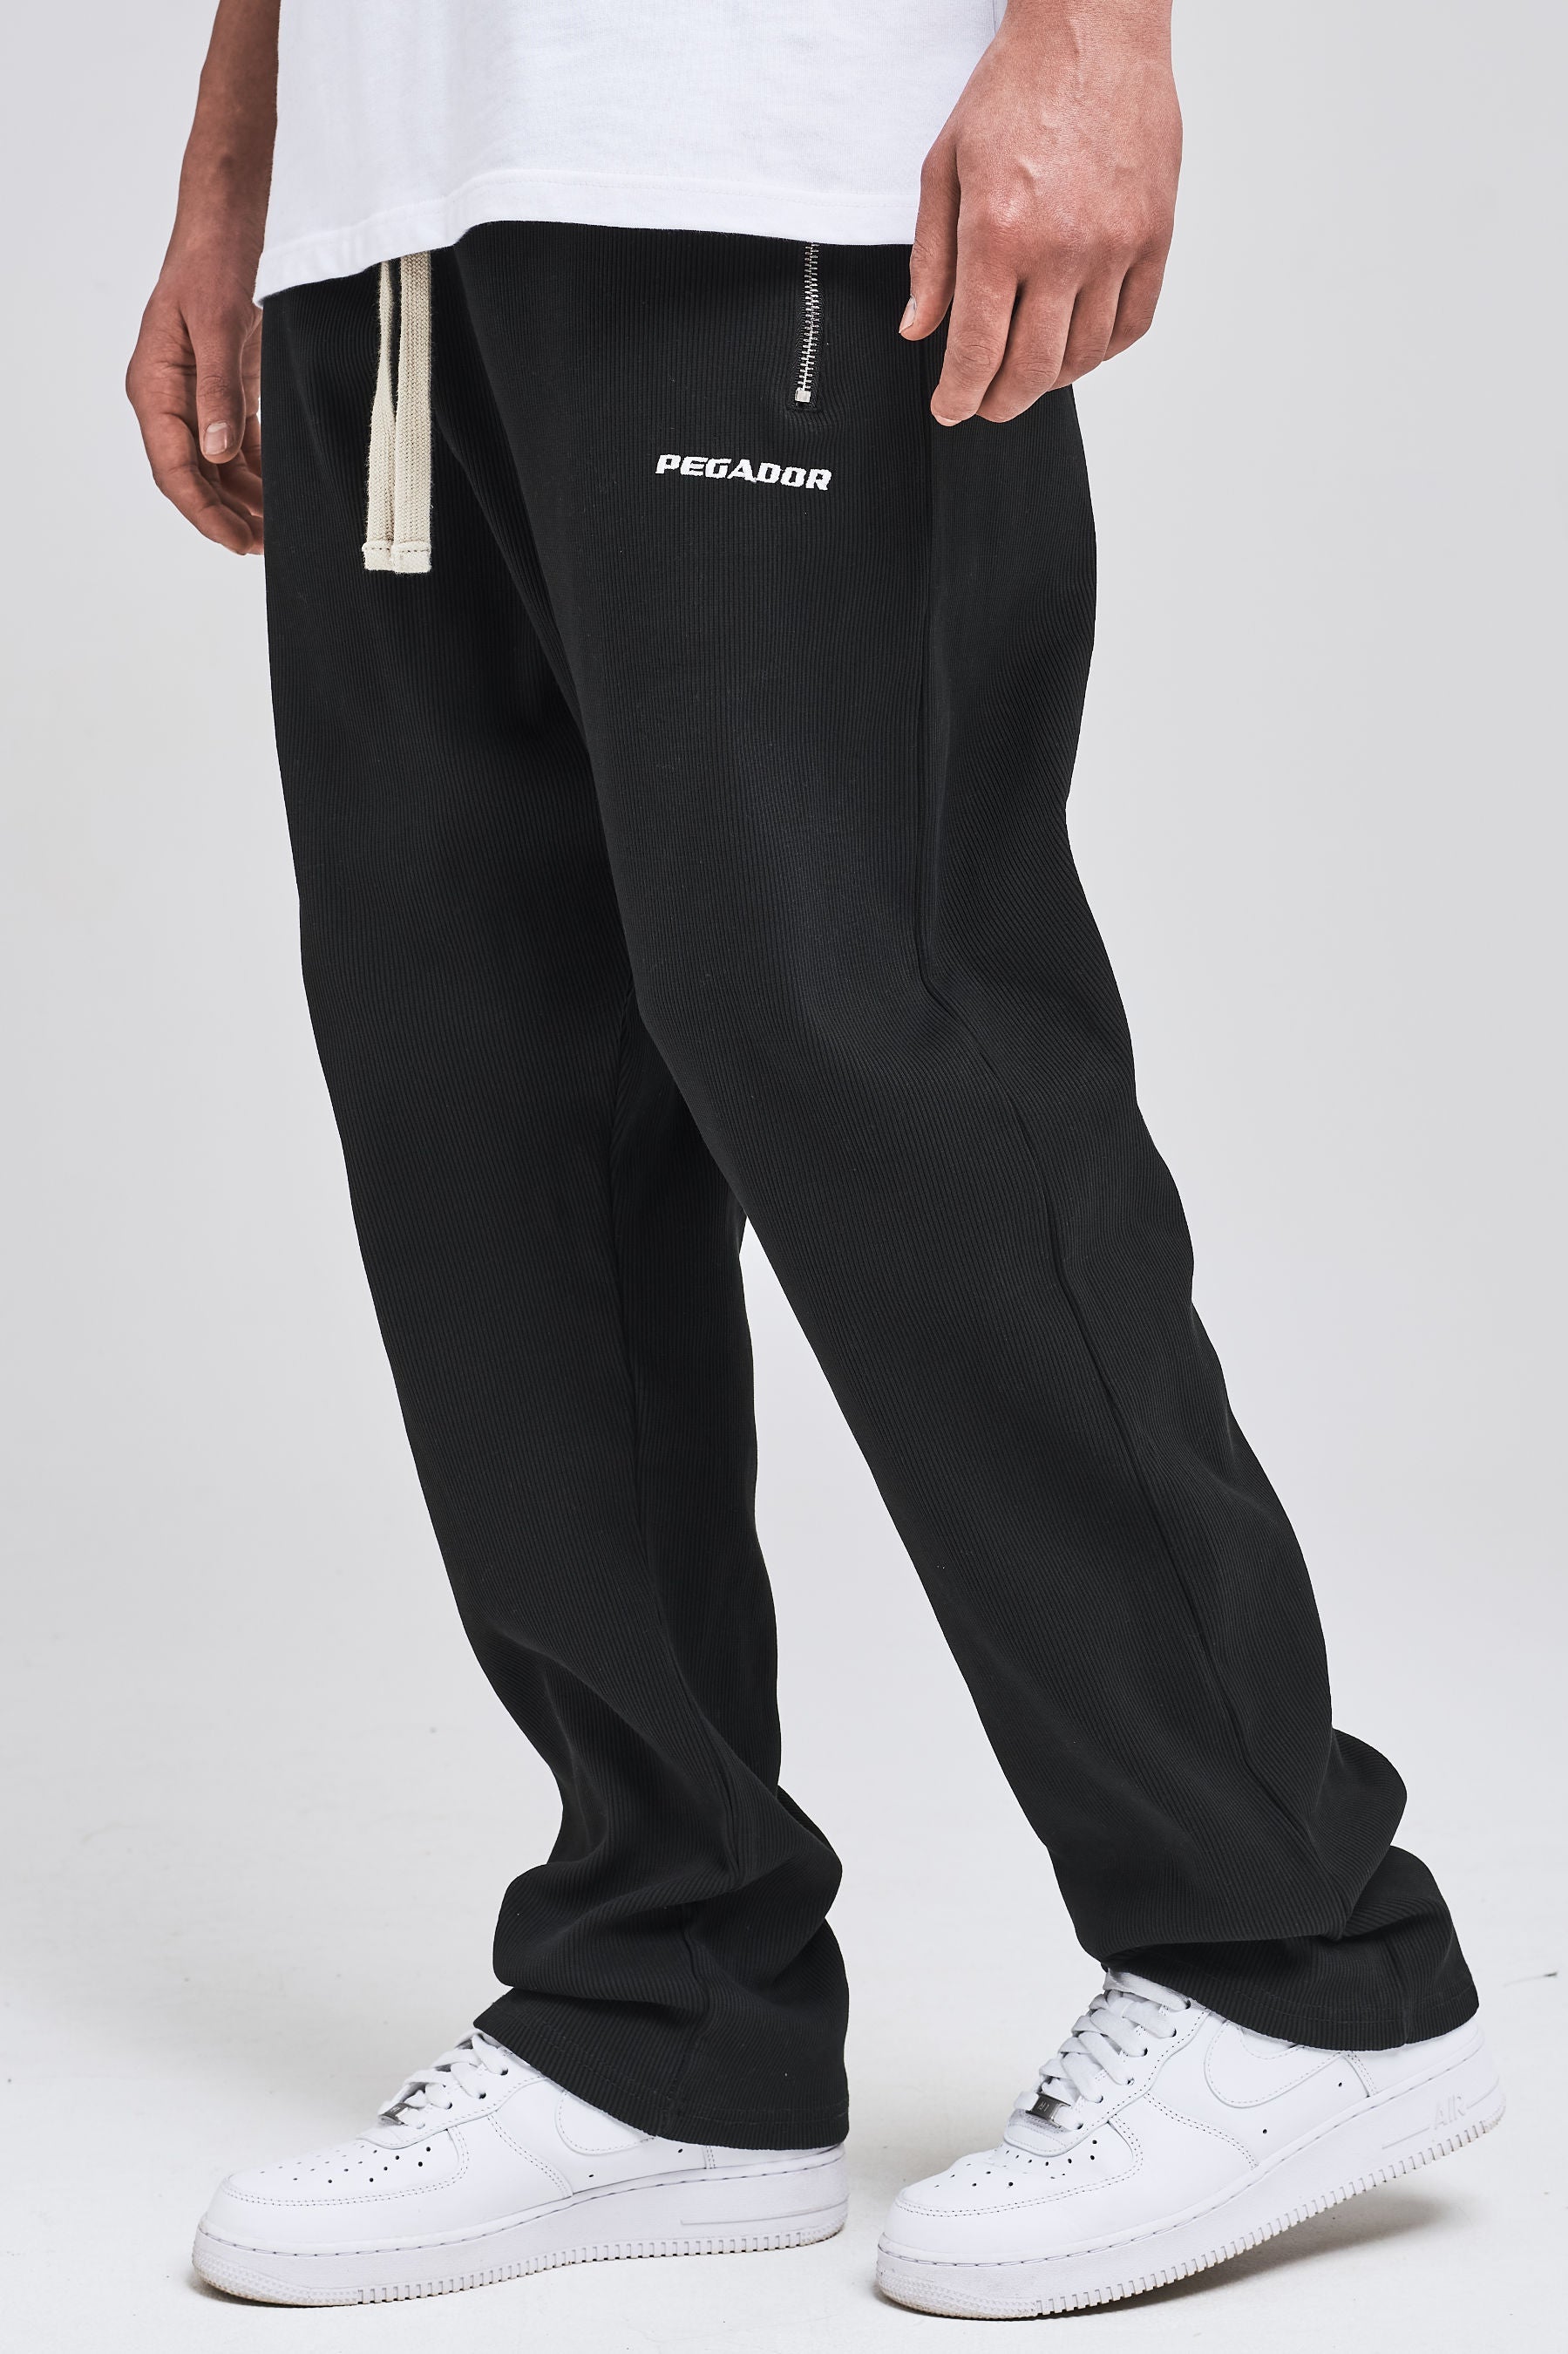 Ribbed Heavy Wide Sweat Pants Washed Coal Bottoms | Men Life We Chose Men 